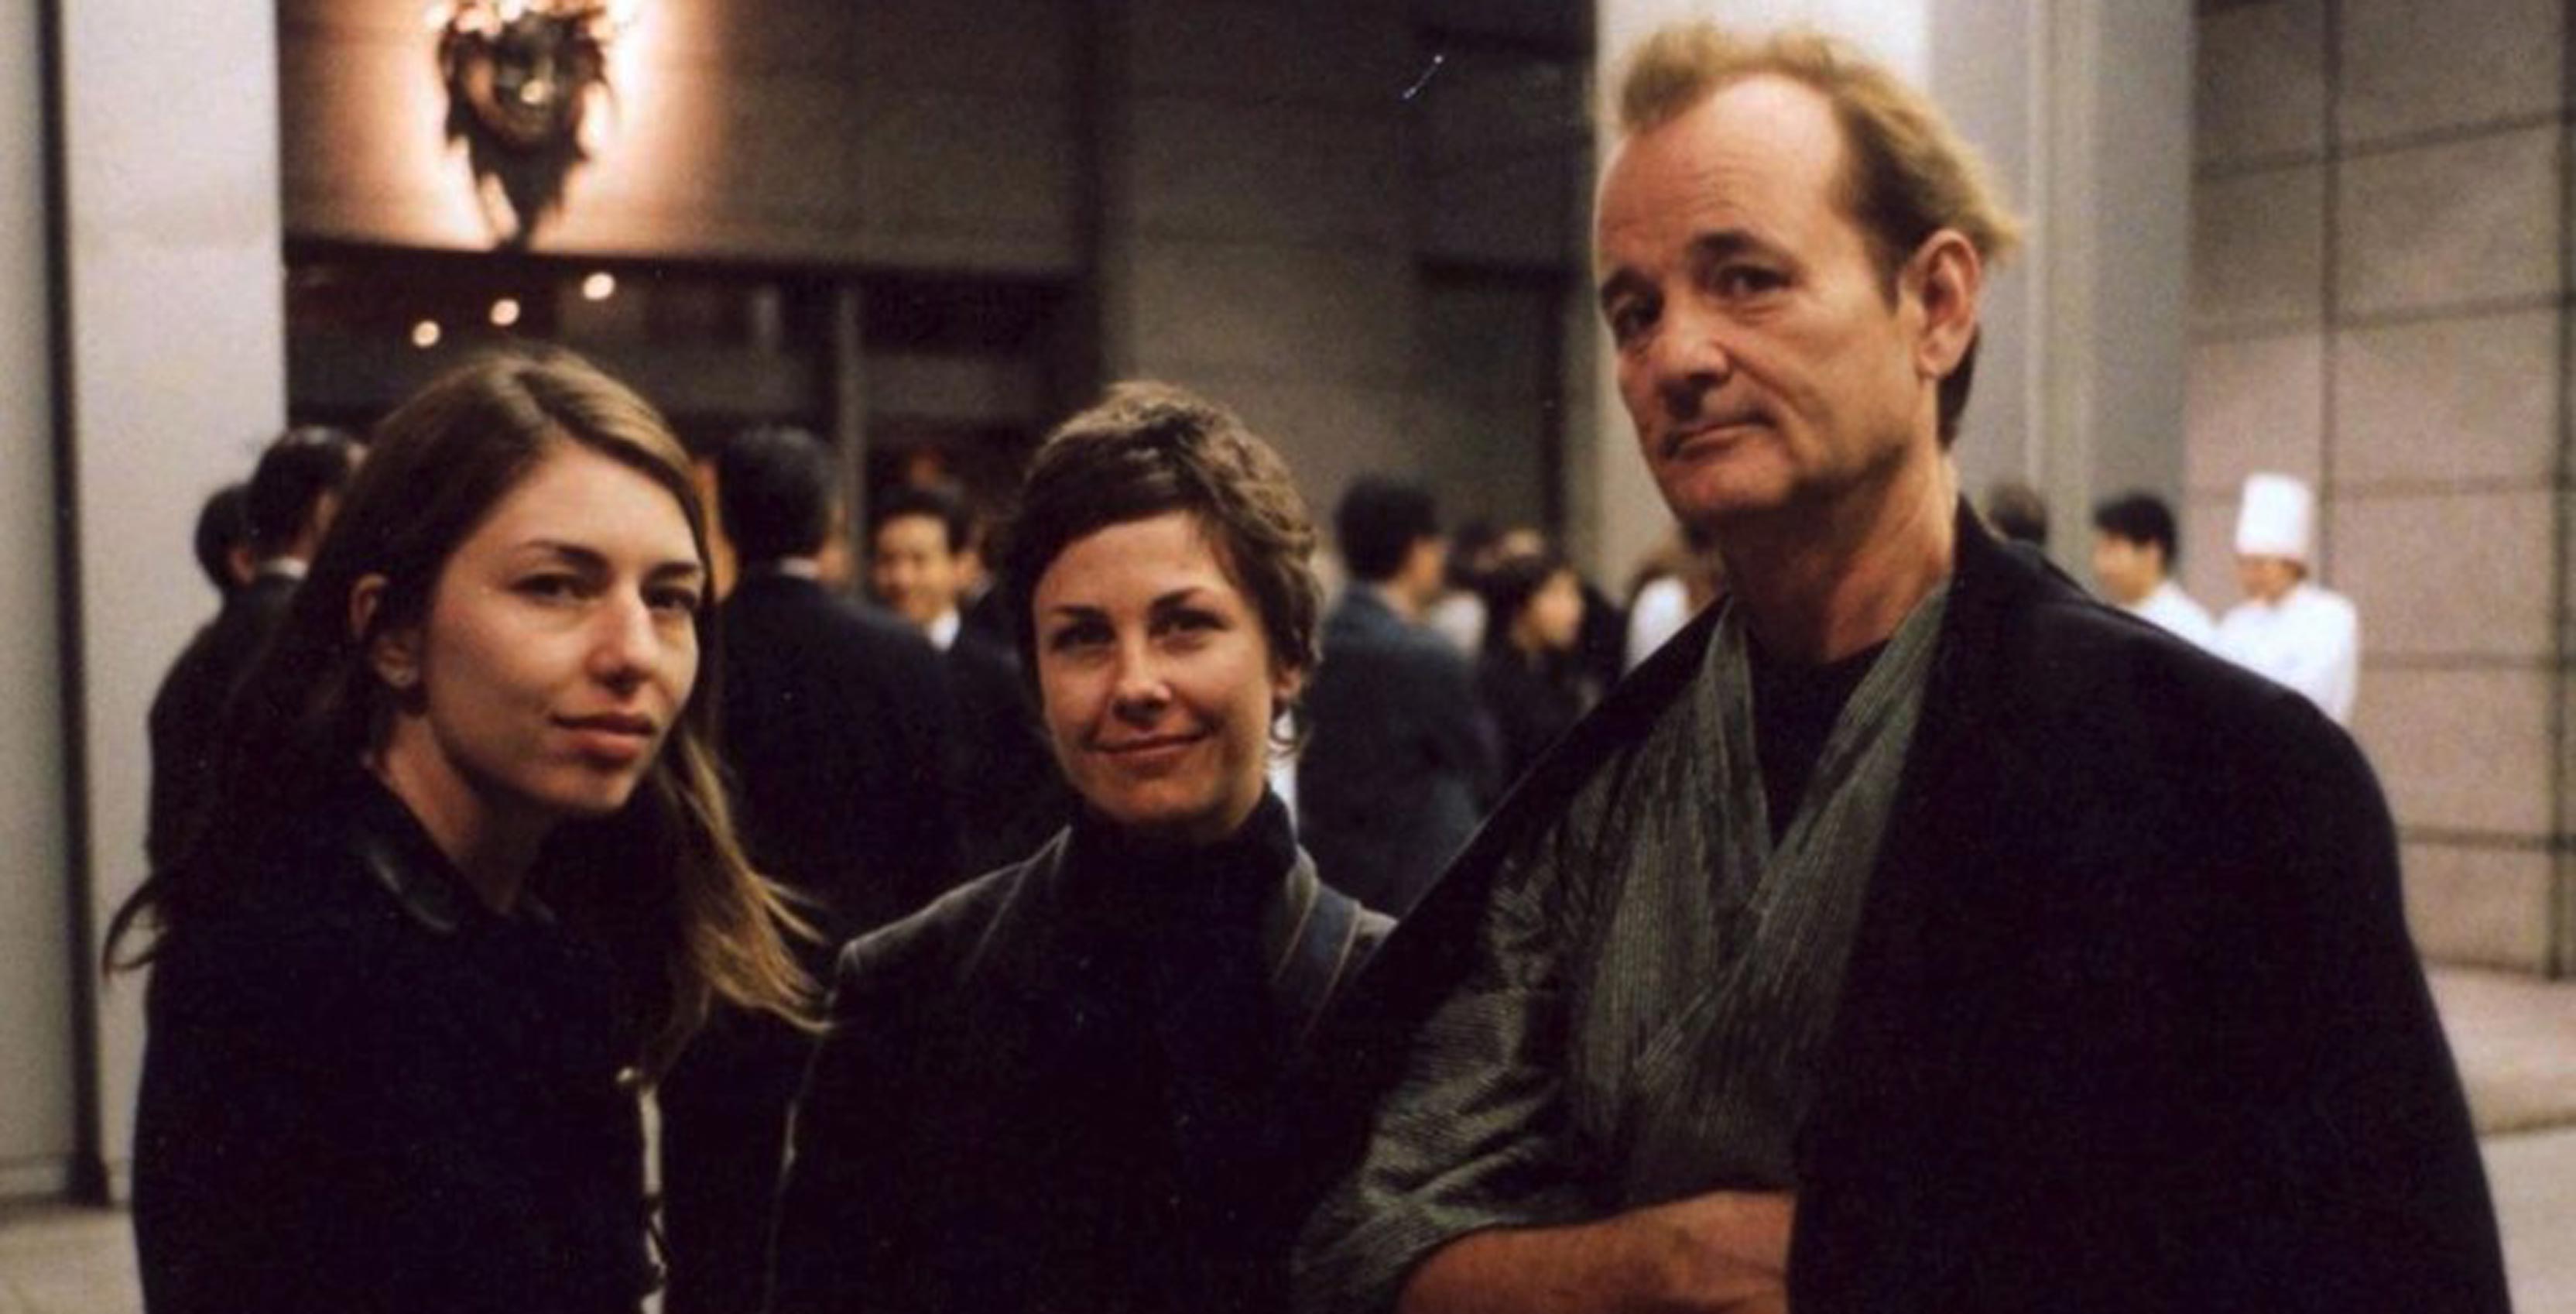 Lost in Translation director Sofia Coppola and actor Bill Murray